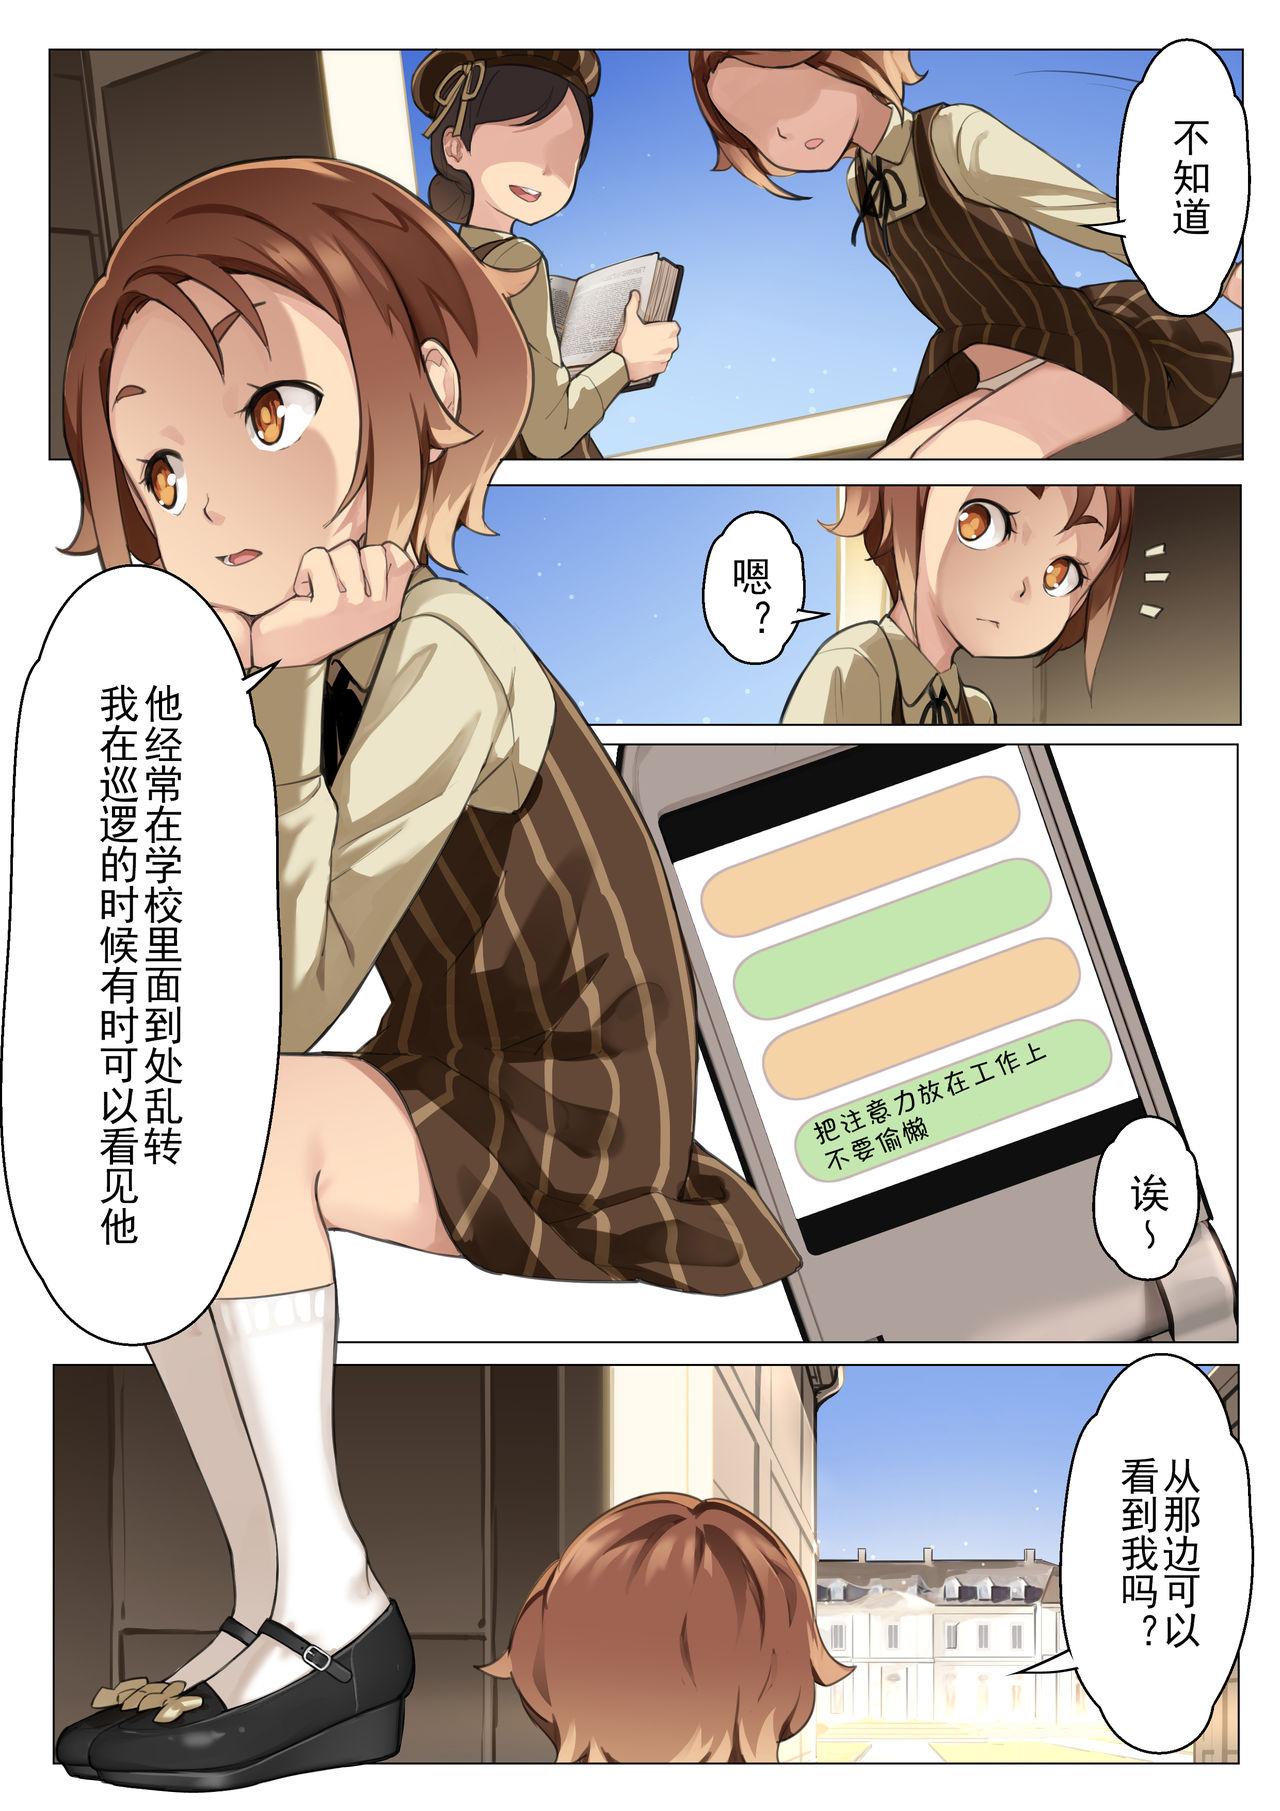 From (同人誌) [BLVEFO9] 乙女の特異性 - 第03話 (オリジナル)[Chinese]【不可视汉化】 - Original Picked Up - Page 13